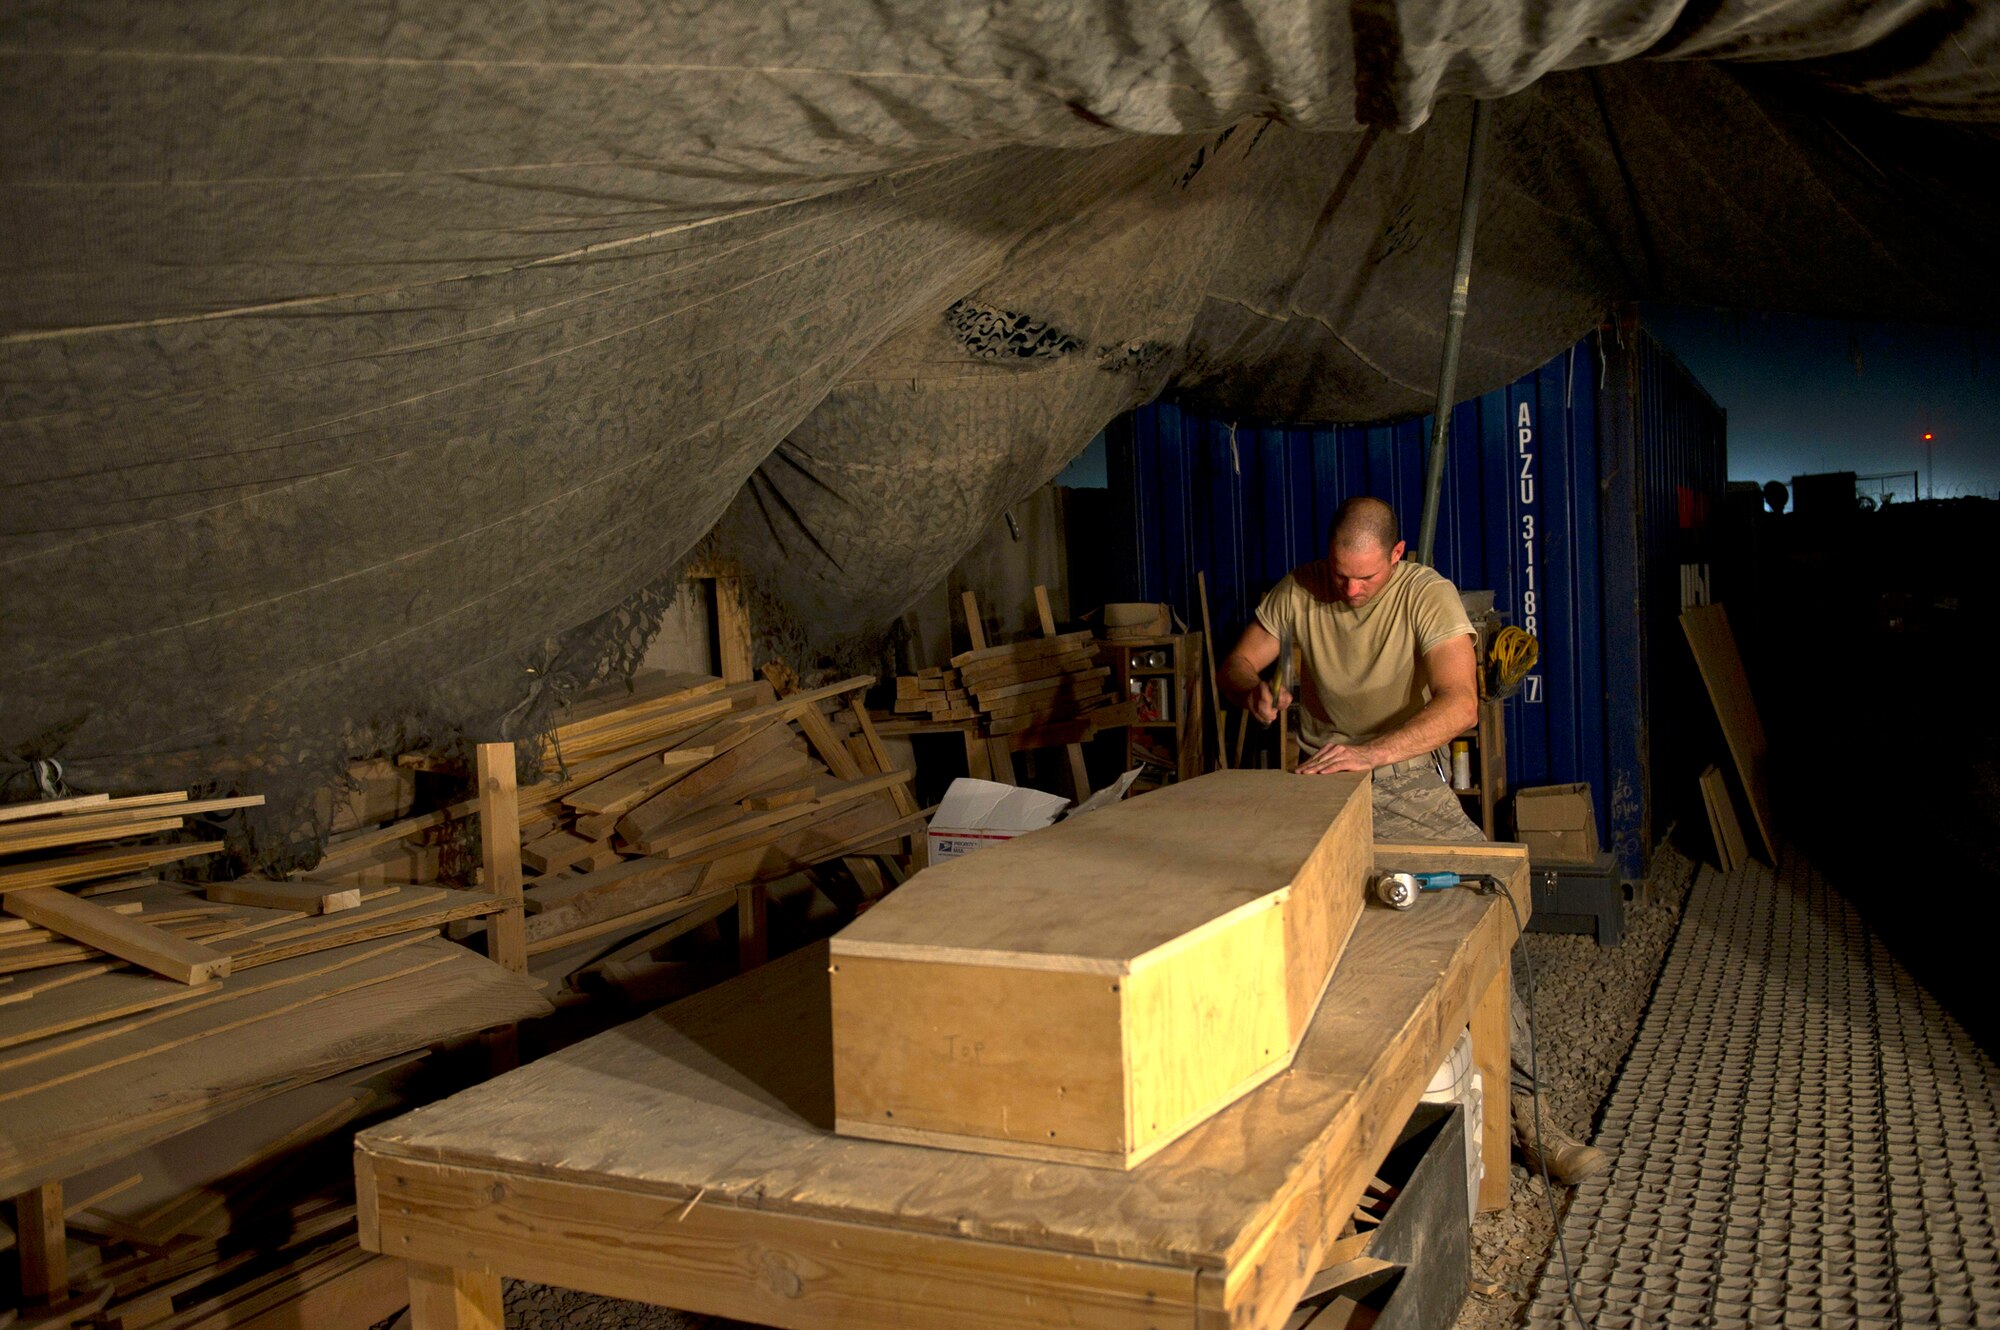 Master Sgt. Jason Reininger builds a child-size coffin to be turned over to the hospital at Camp Bastion, Afghanistan. Sergeant Reininger is an aerospace medical technician assigned to the 451st Expeditionary Aeromedical Evacuation Squadron. (U.S. Air Force photo/Master Sgt. Adrian Cadiz)